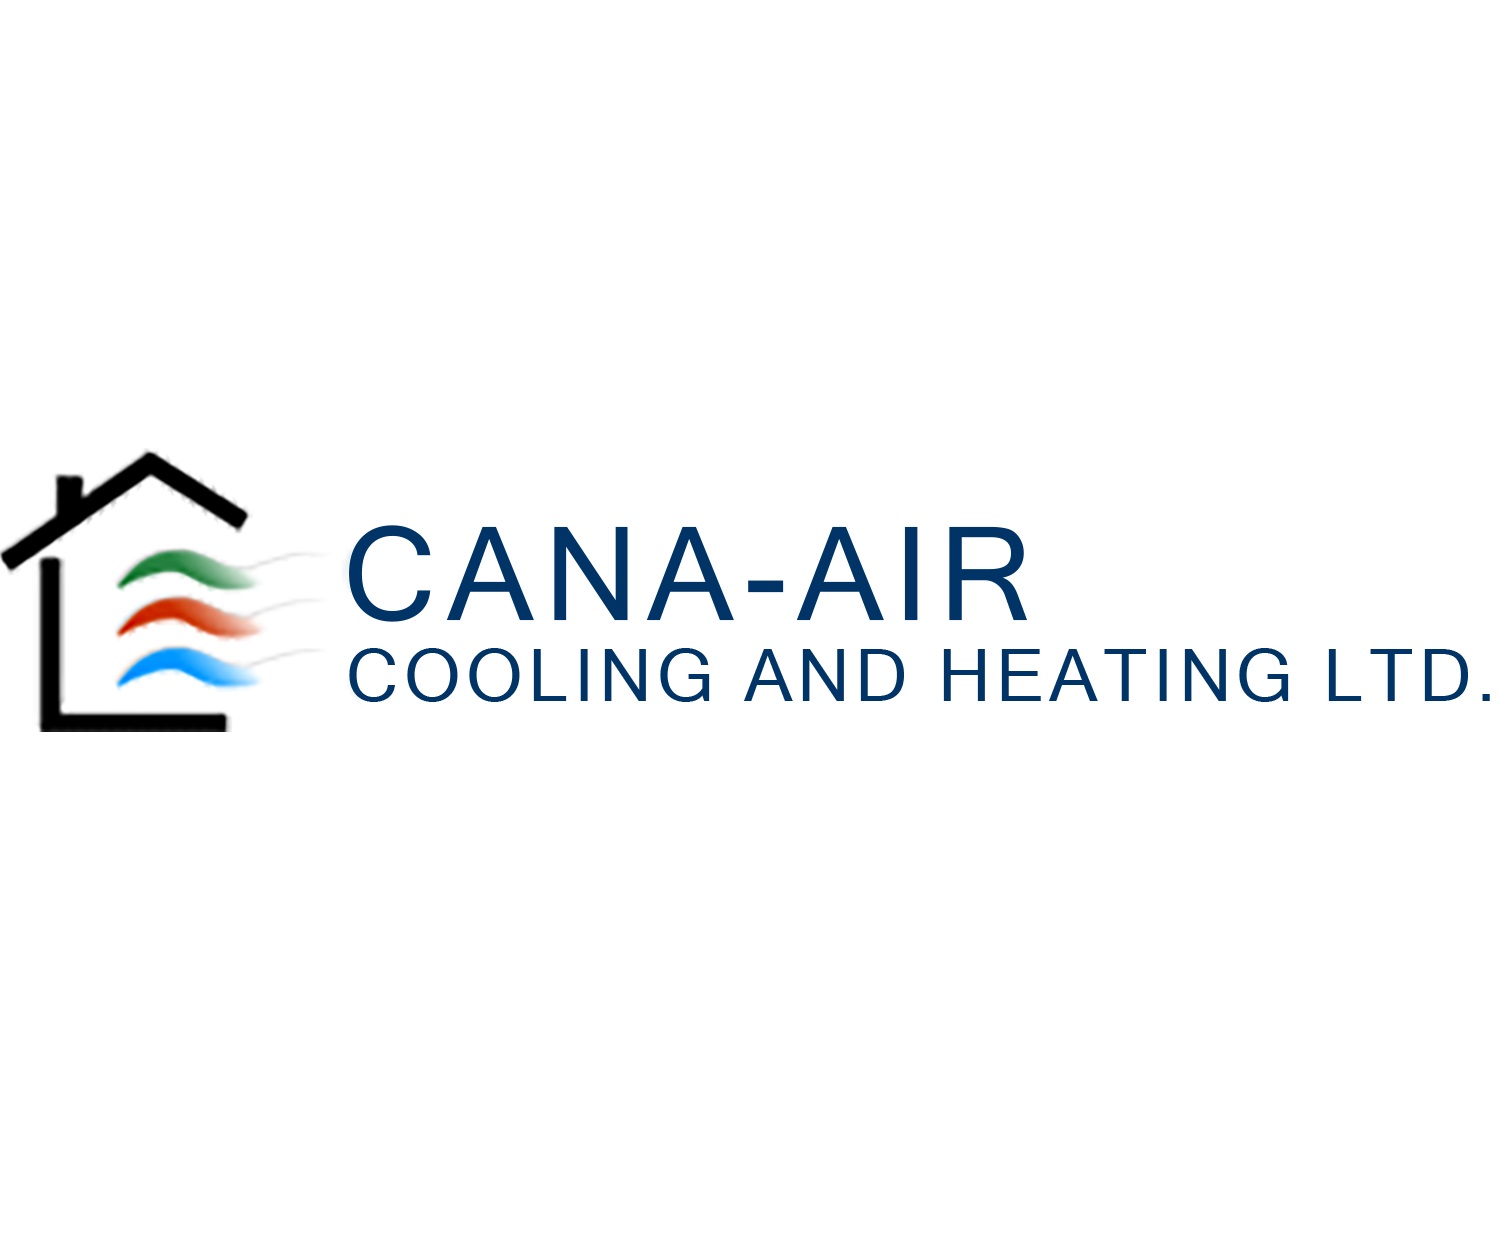 Cana-Air Cooling and Heating LTD.'s logo